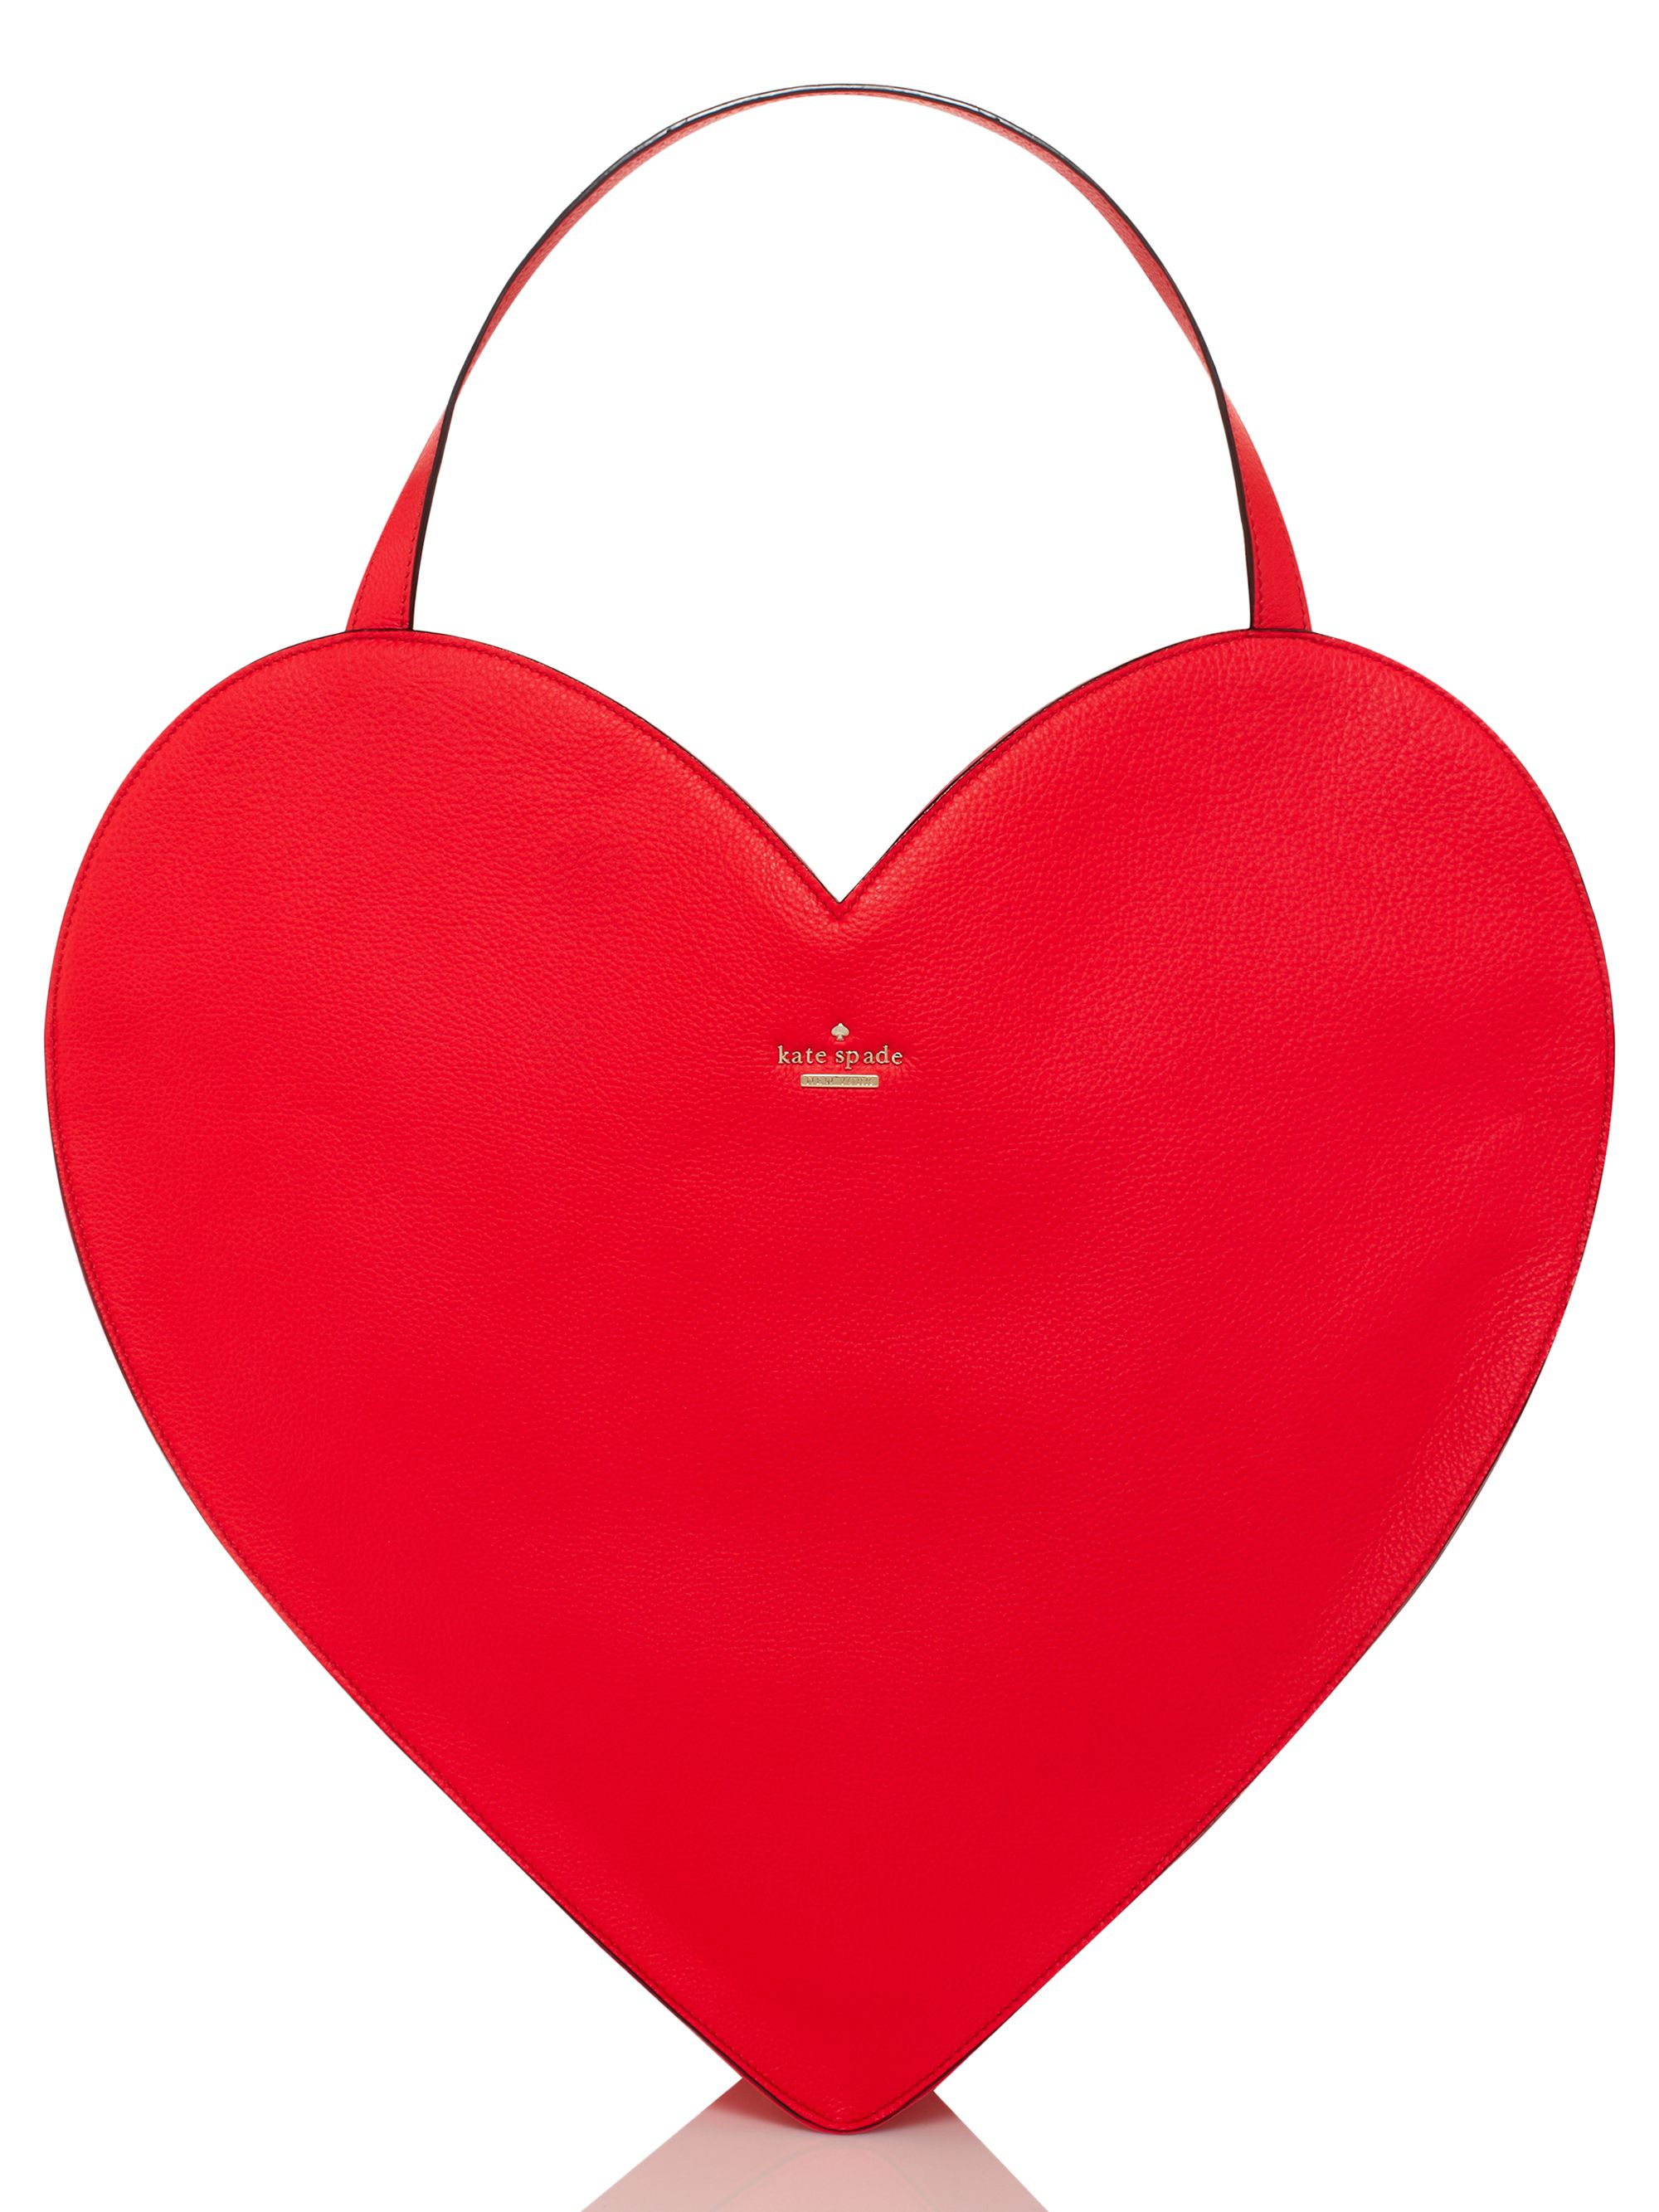 Kate spade new york Love Birds Heart Tote in Red | Lyst